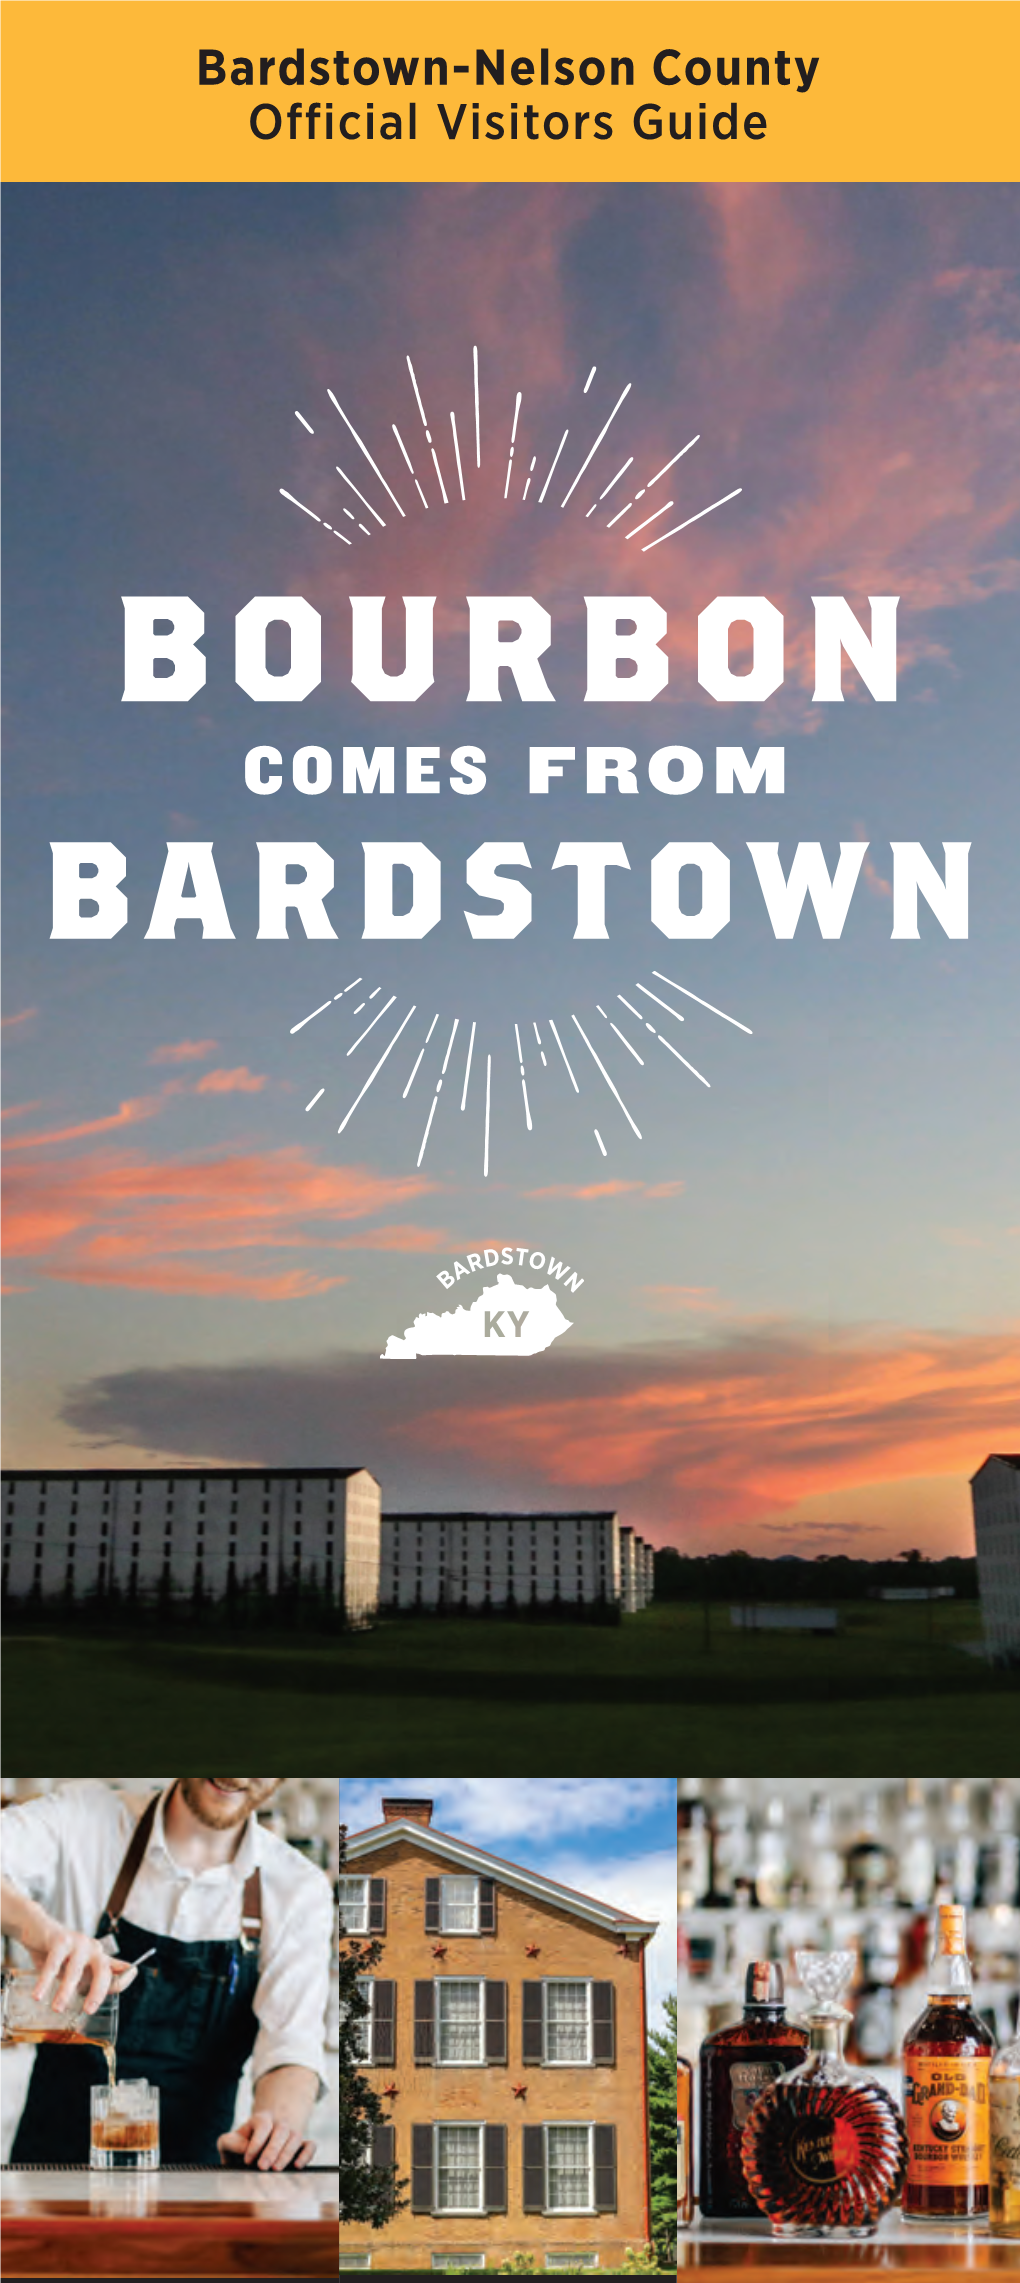 Bardstown-Nelson County Official Visitors Guide TABLE of CONTENTS